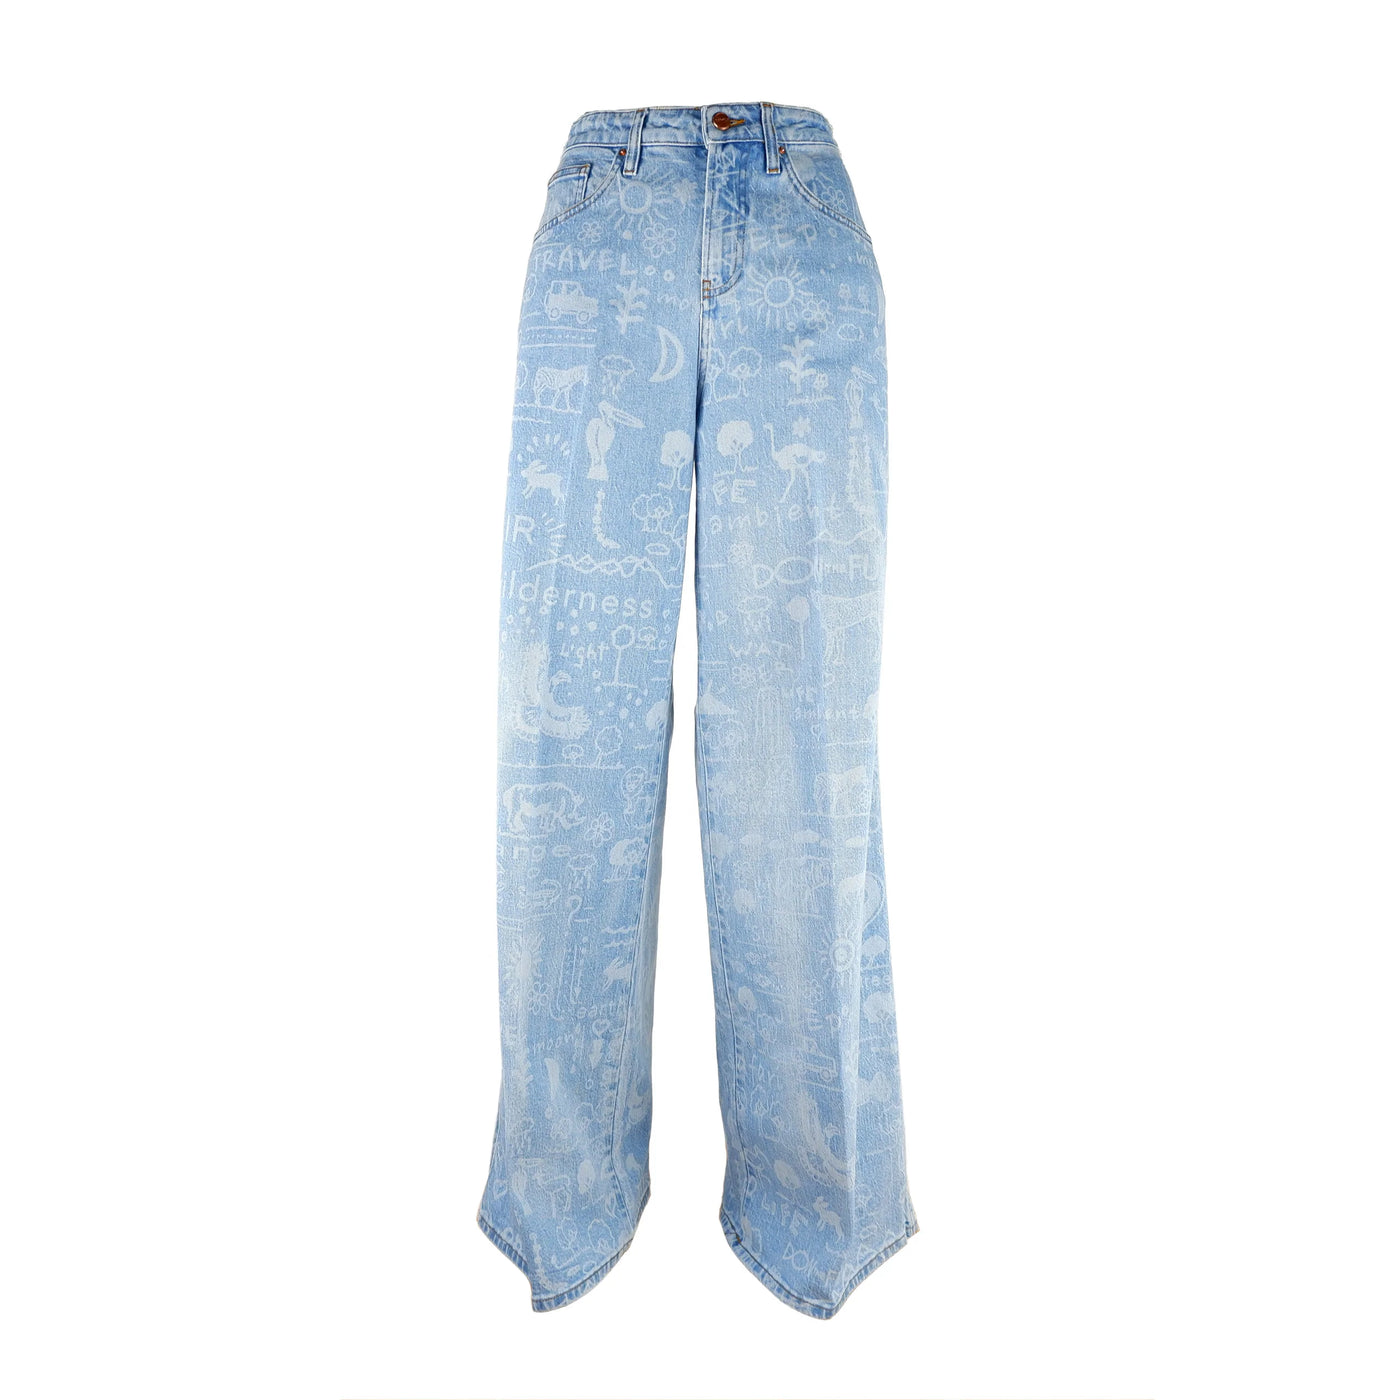 Don The Fuller Light Blue Cotton Jeans & Pant Don The Fuller, feed-1, Jeans & Pants - Women - Clothing, Light Blue, W31 | IT45 at SEYMAYKA